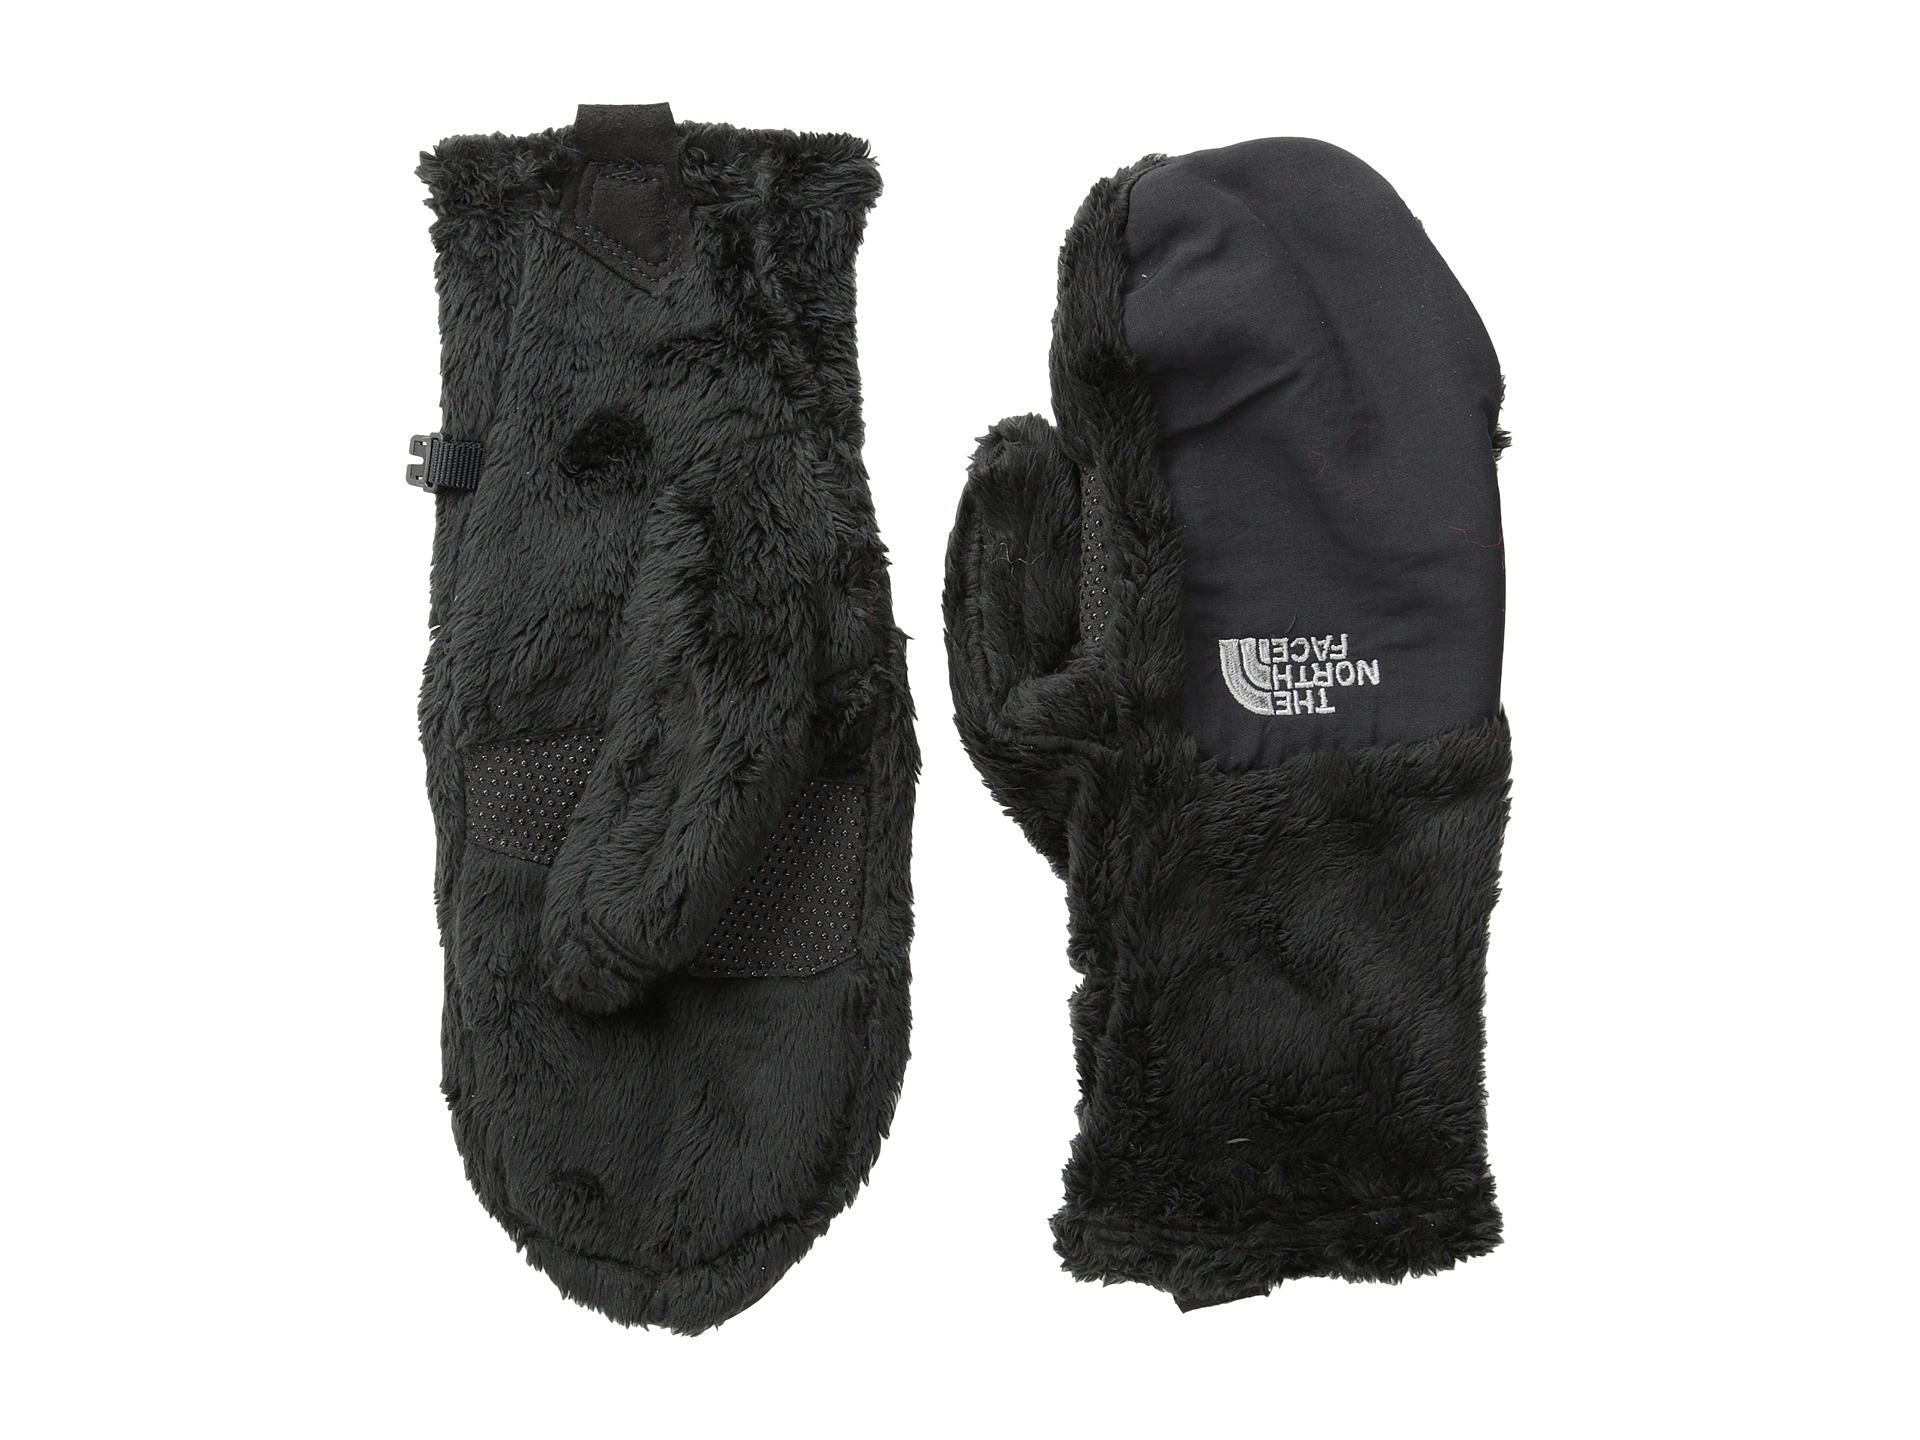 north face mittens 800 down 